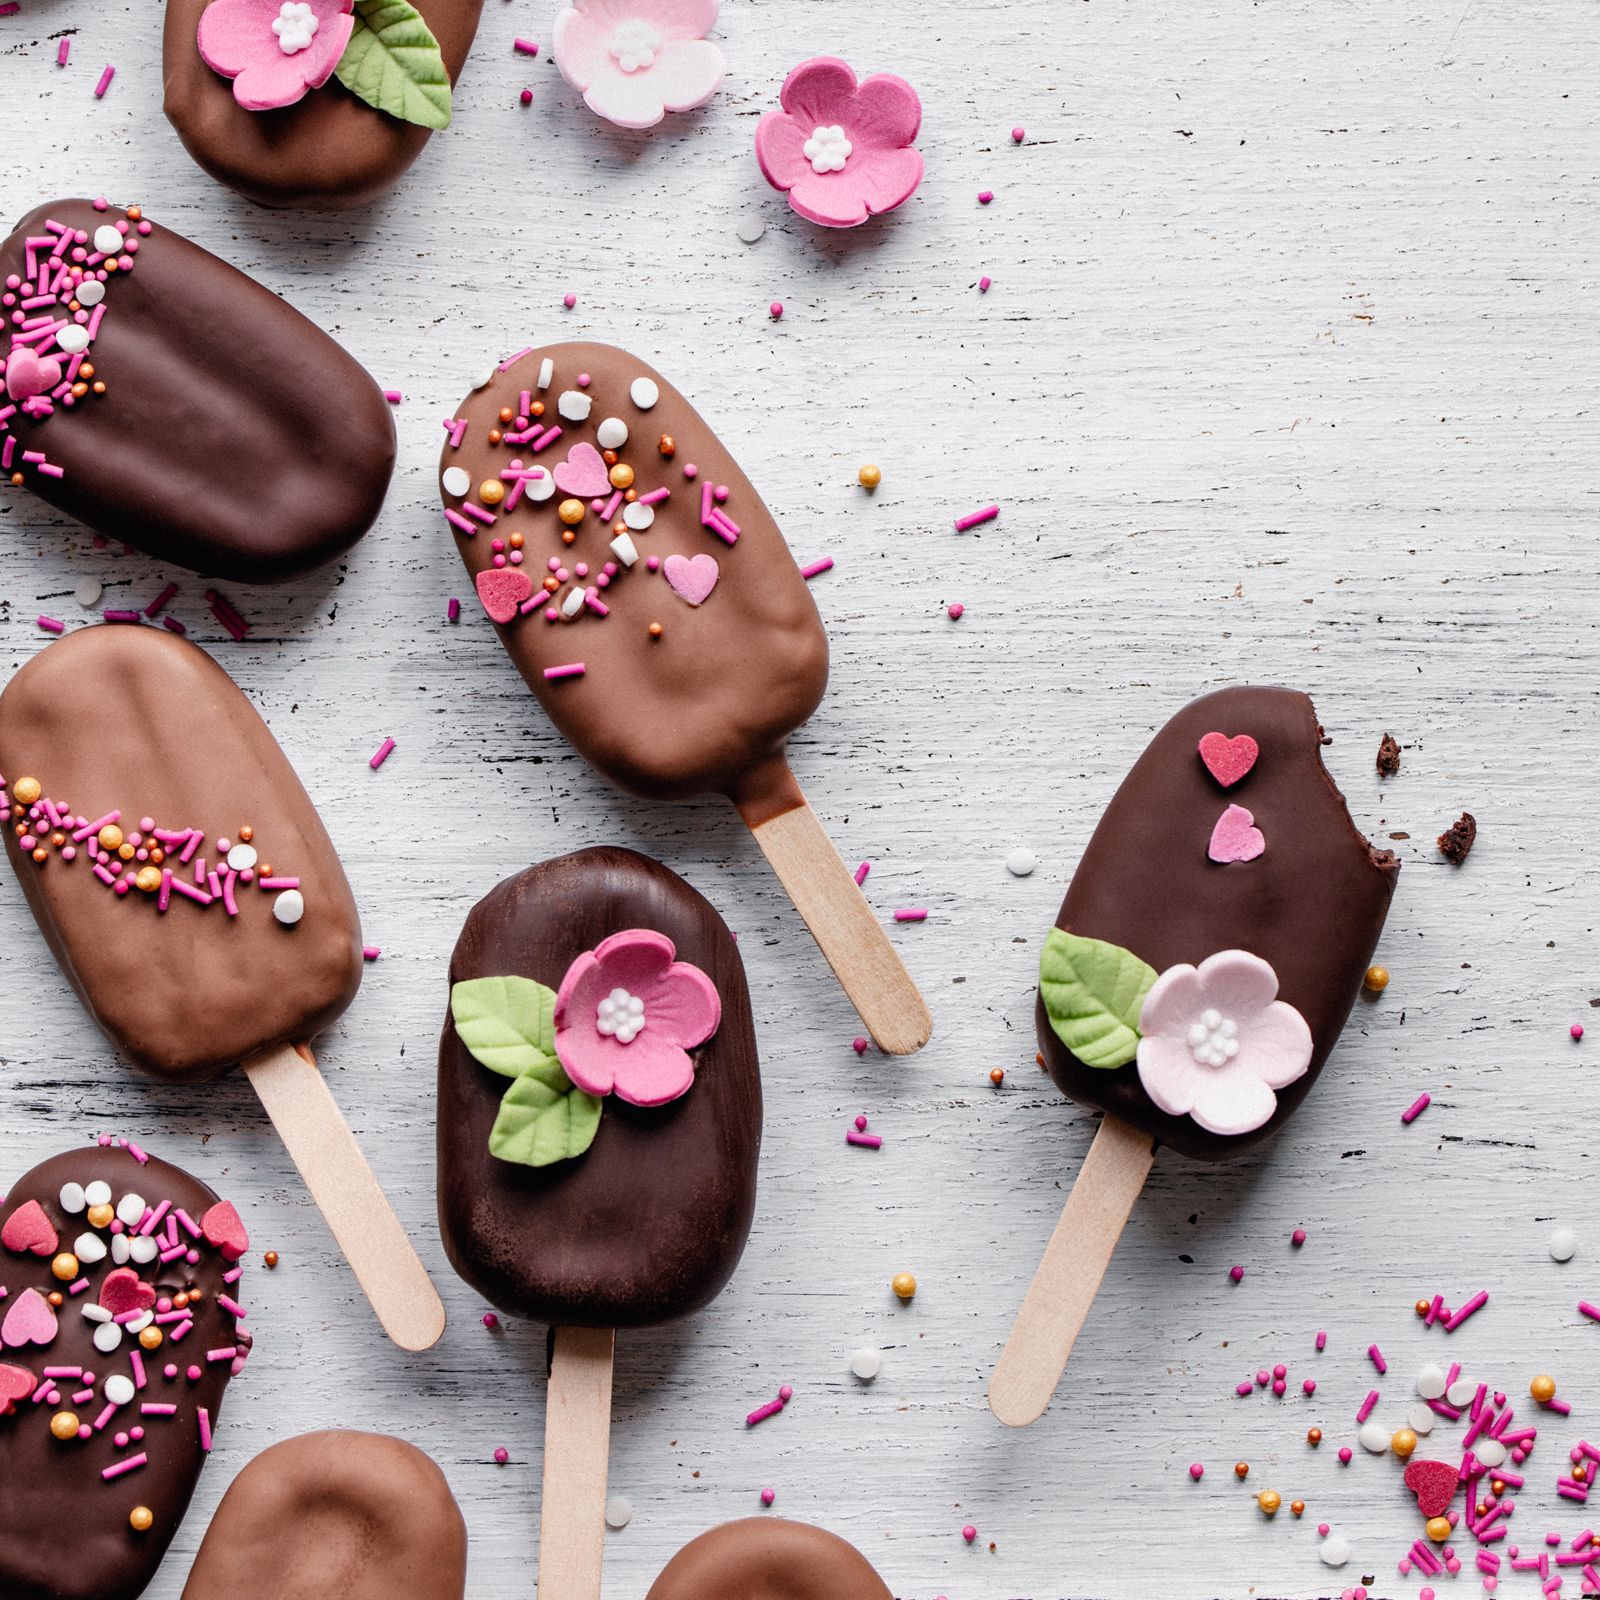 Chocolate Cake Pop recipes by Lily O'Brien's